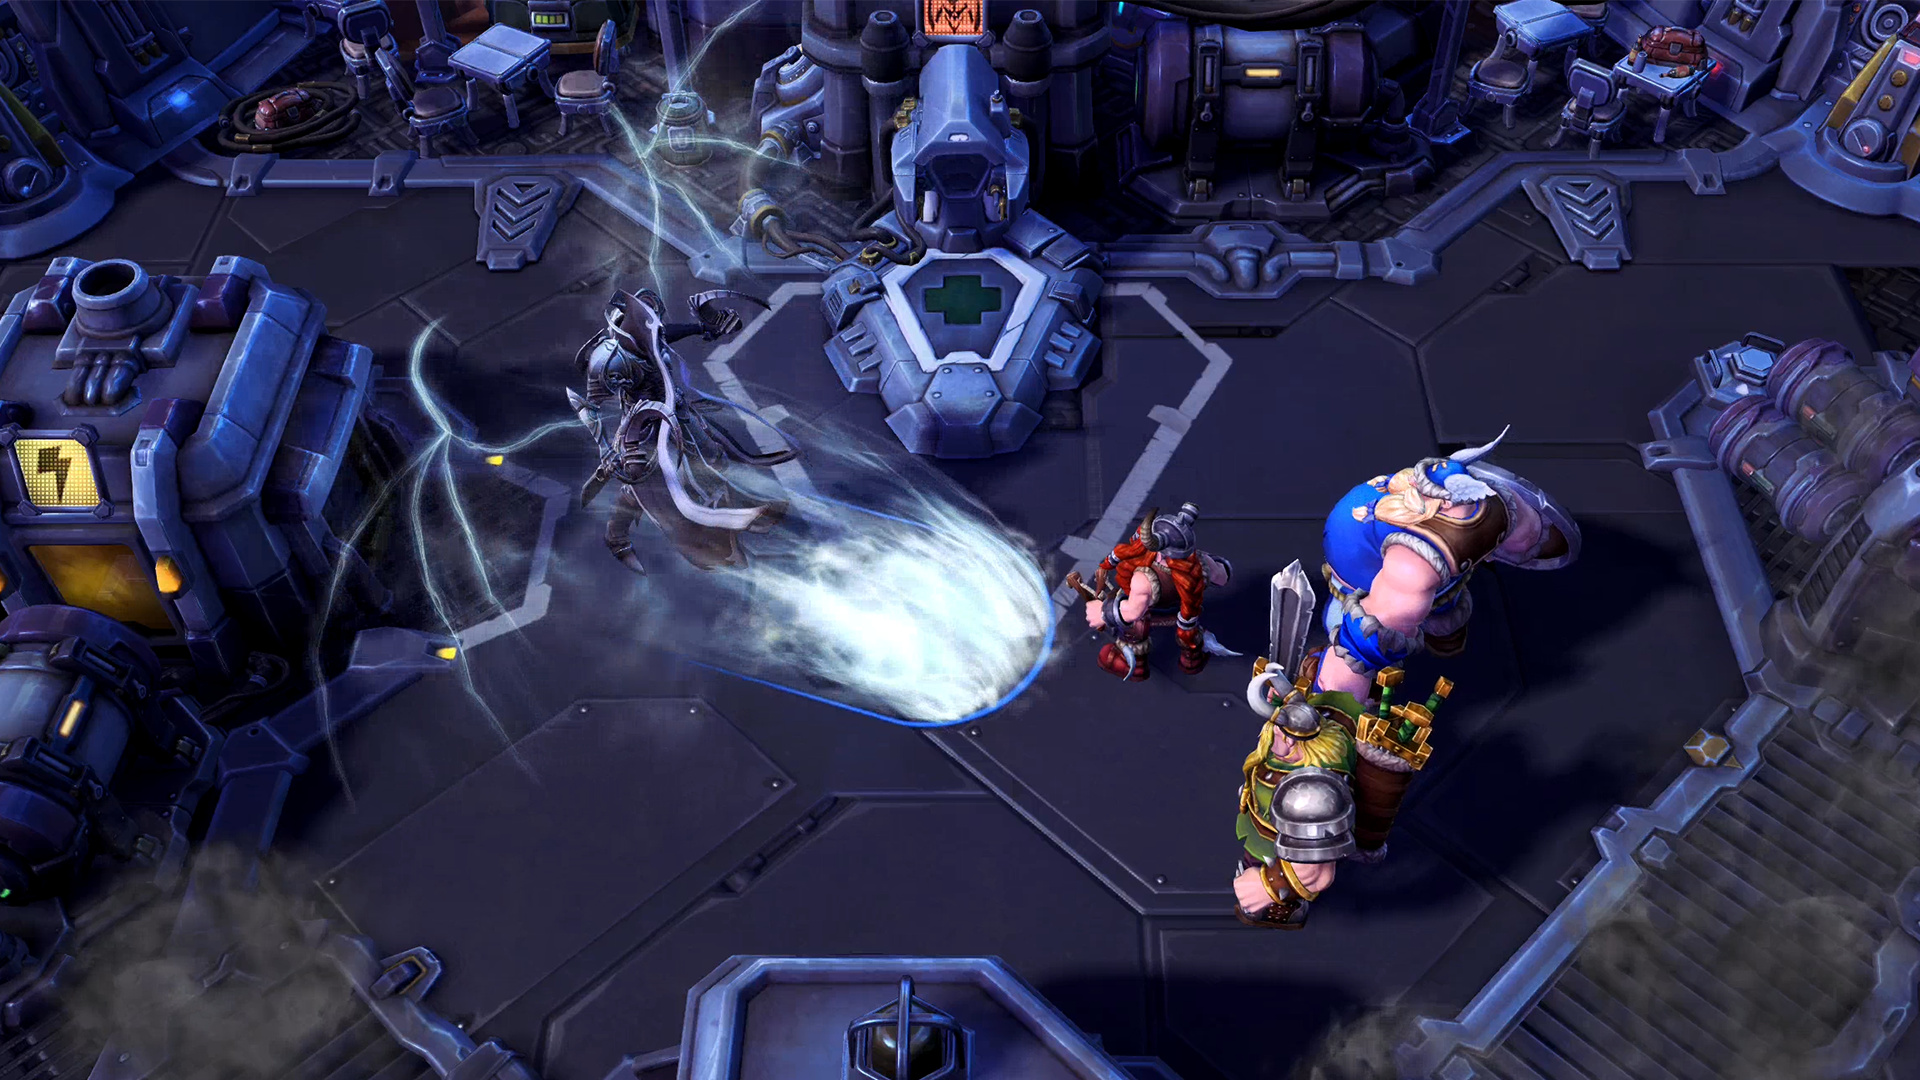 Diablo's Malthael joins Heroes of the Storm's roster - Polygon